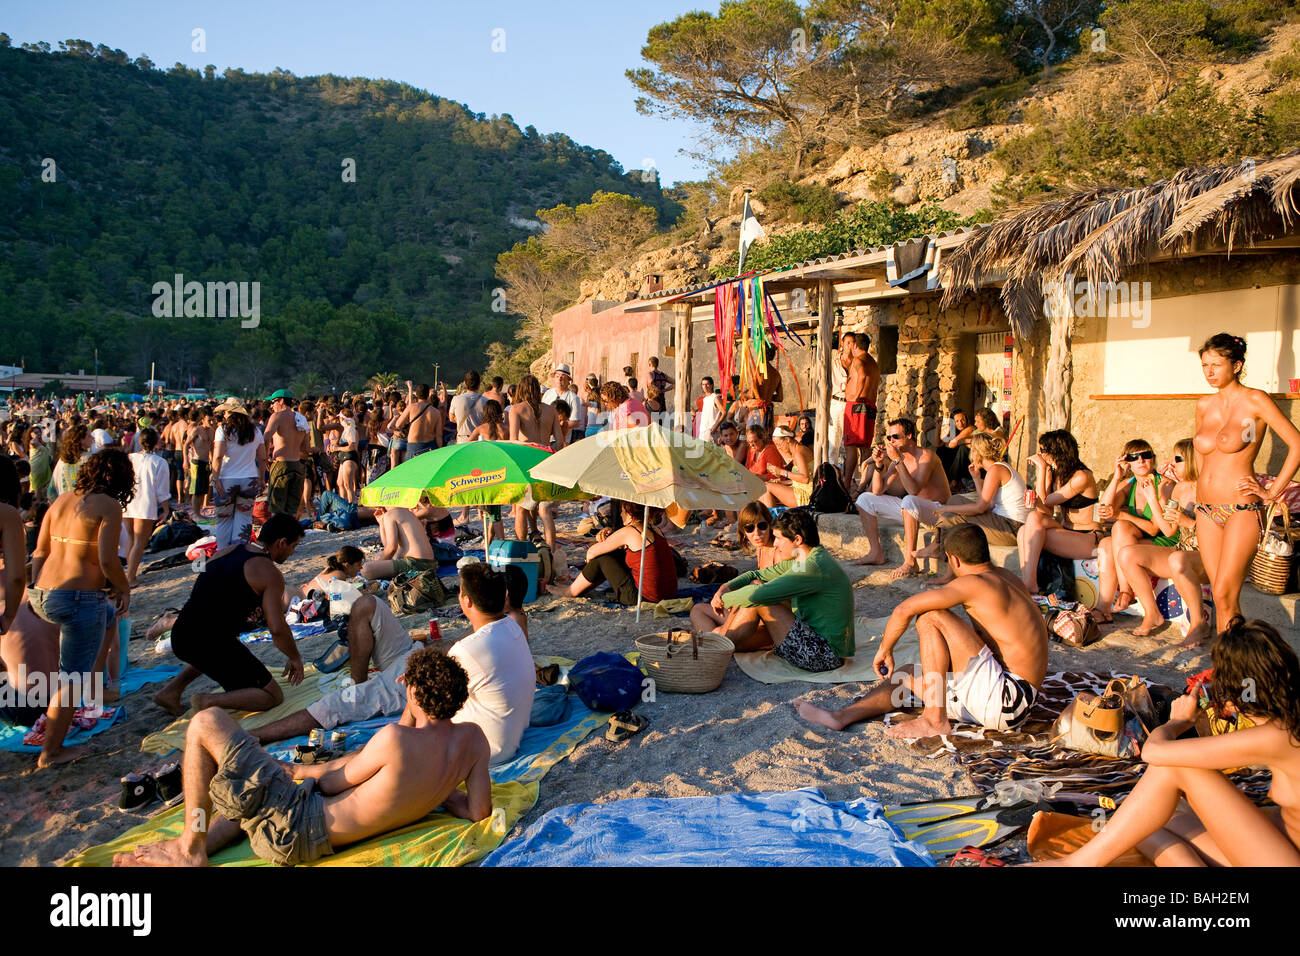 Spain, Balearic Islands, Ibiza island, Benniras beach, during summer, drum concerts are taking place every sunday afternoon Stock Photo